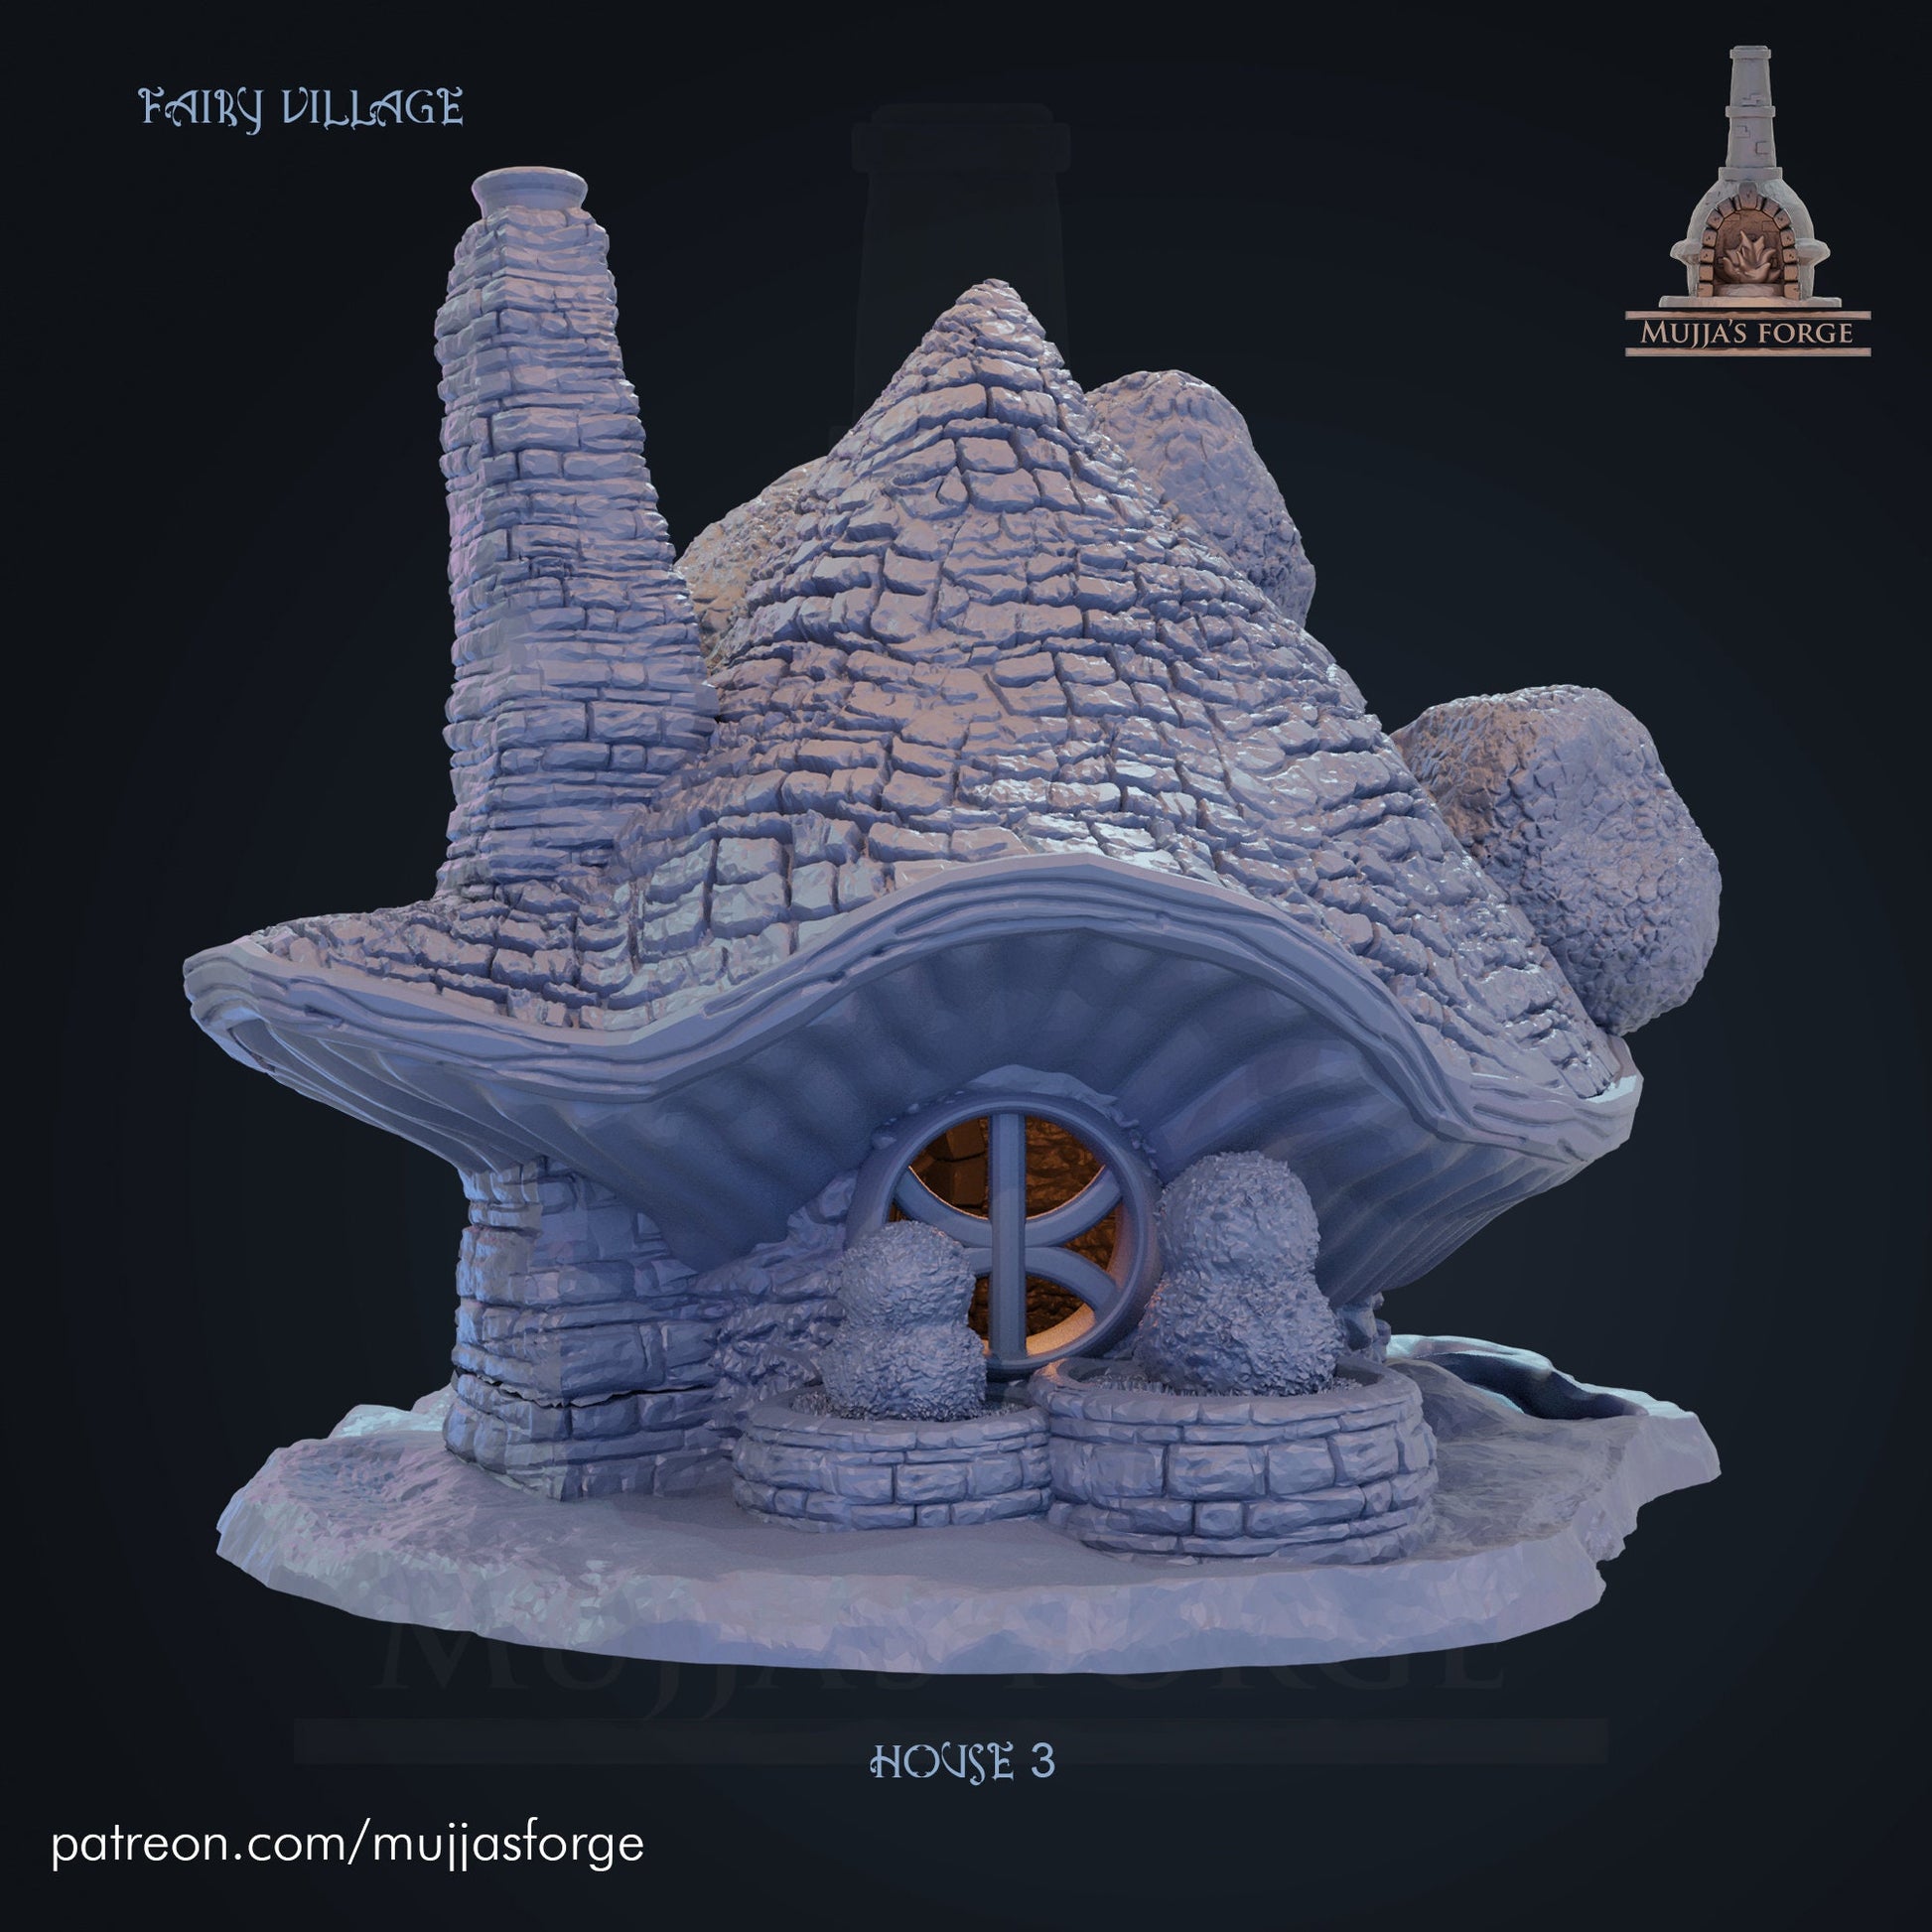 Fairy Village, House 1, Fairy House 1, 28mm Terrain, Fantasy Terrain, dungeons and Dragons, Fantasy, Gift, Tabletop, Terrain, Wargaming, RPG Terrain, Tabletop RPG, Wargaming, Wargame Terrain, Tabletop terrain, Tabletop. Odd, oddity, Gaming